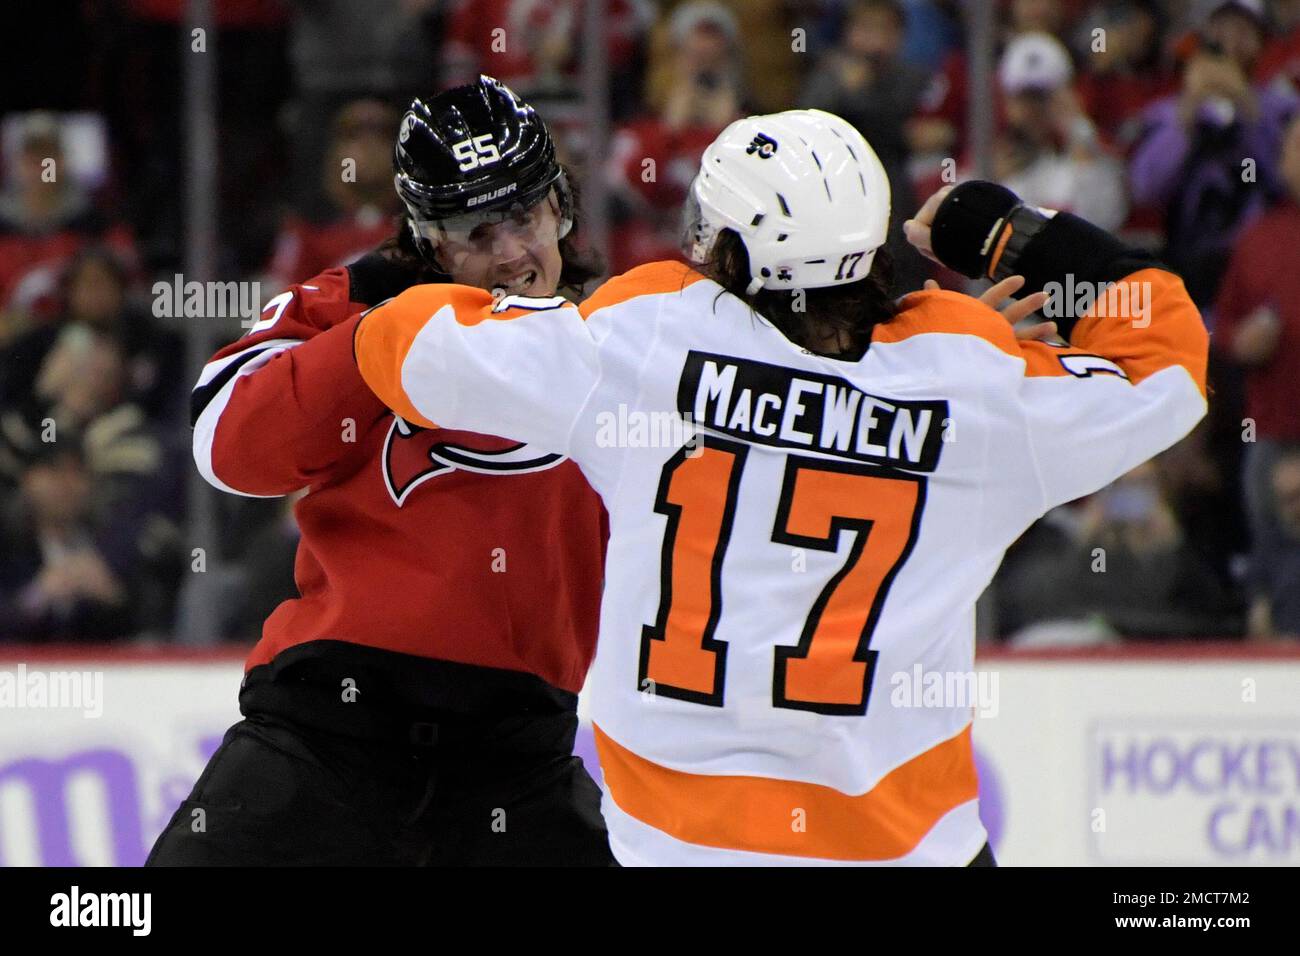 Zack MacEwen has the right tools to become Flyers fan favorite